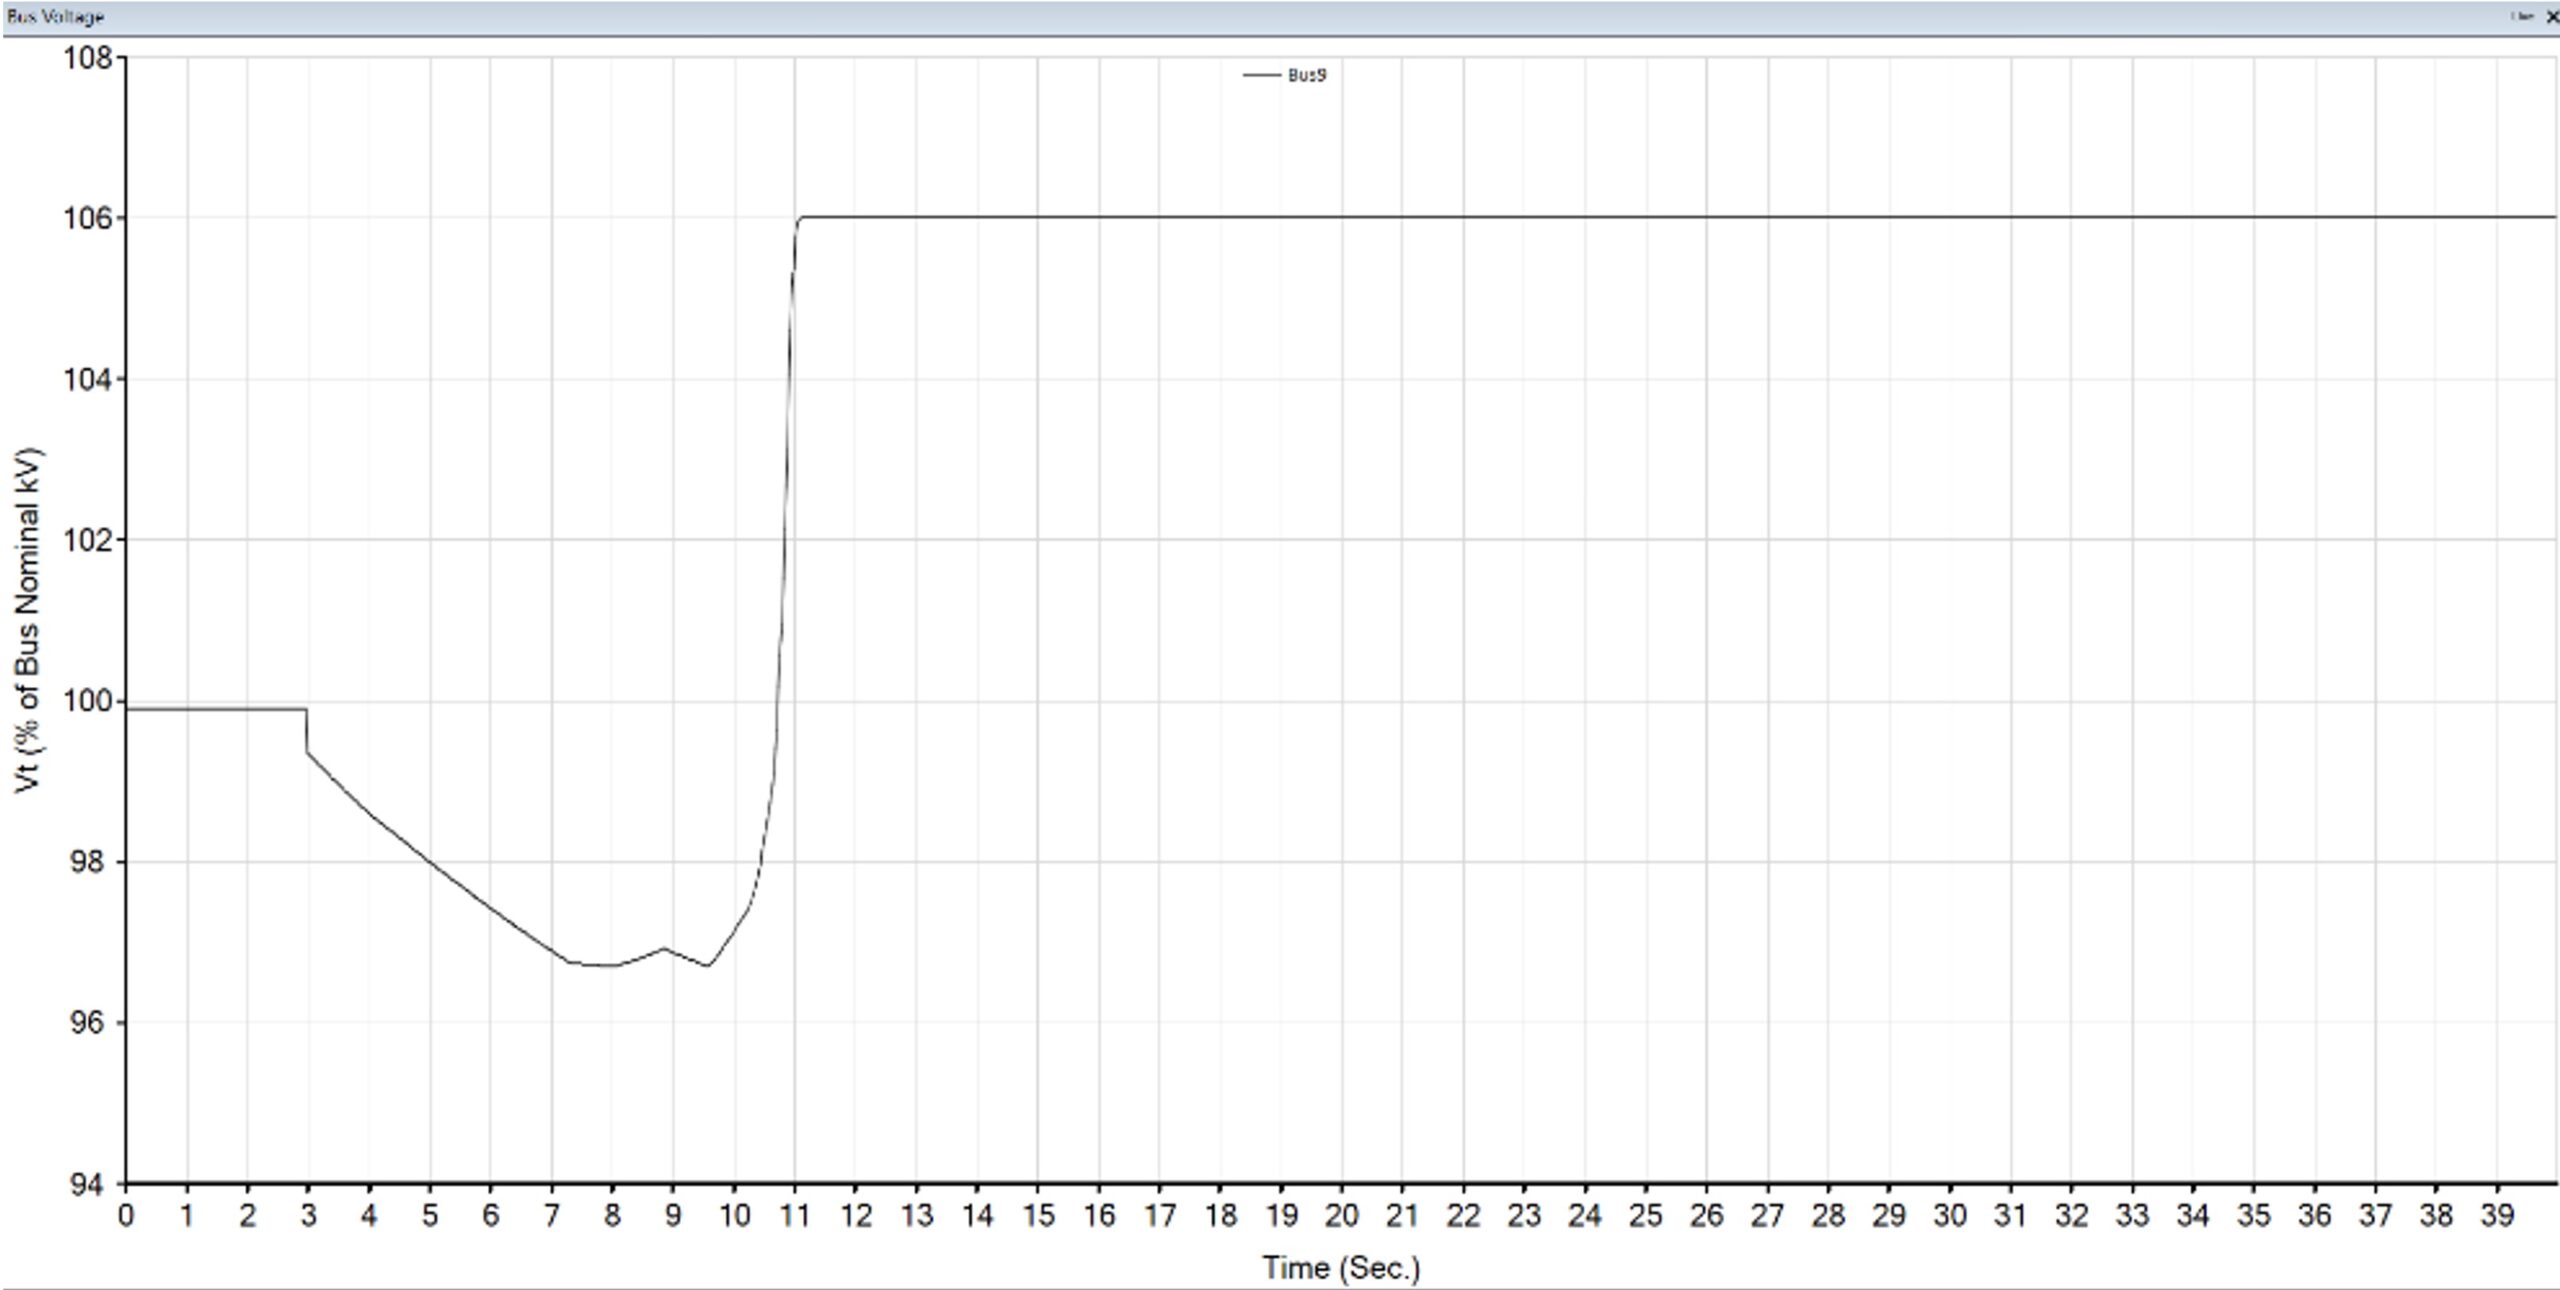 4.16KV Bus - Result if we don’t switch off the capacitors after motor reaching the rated speed (Scenario C)